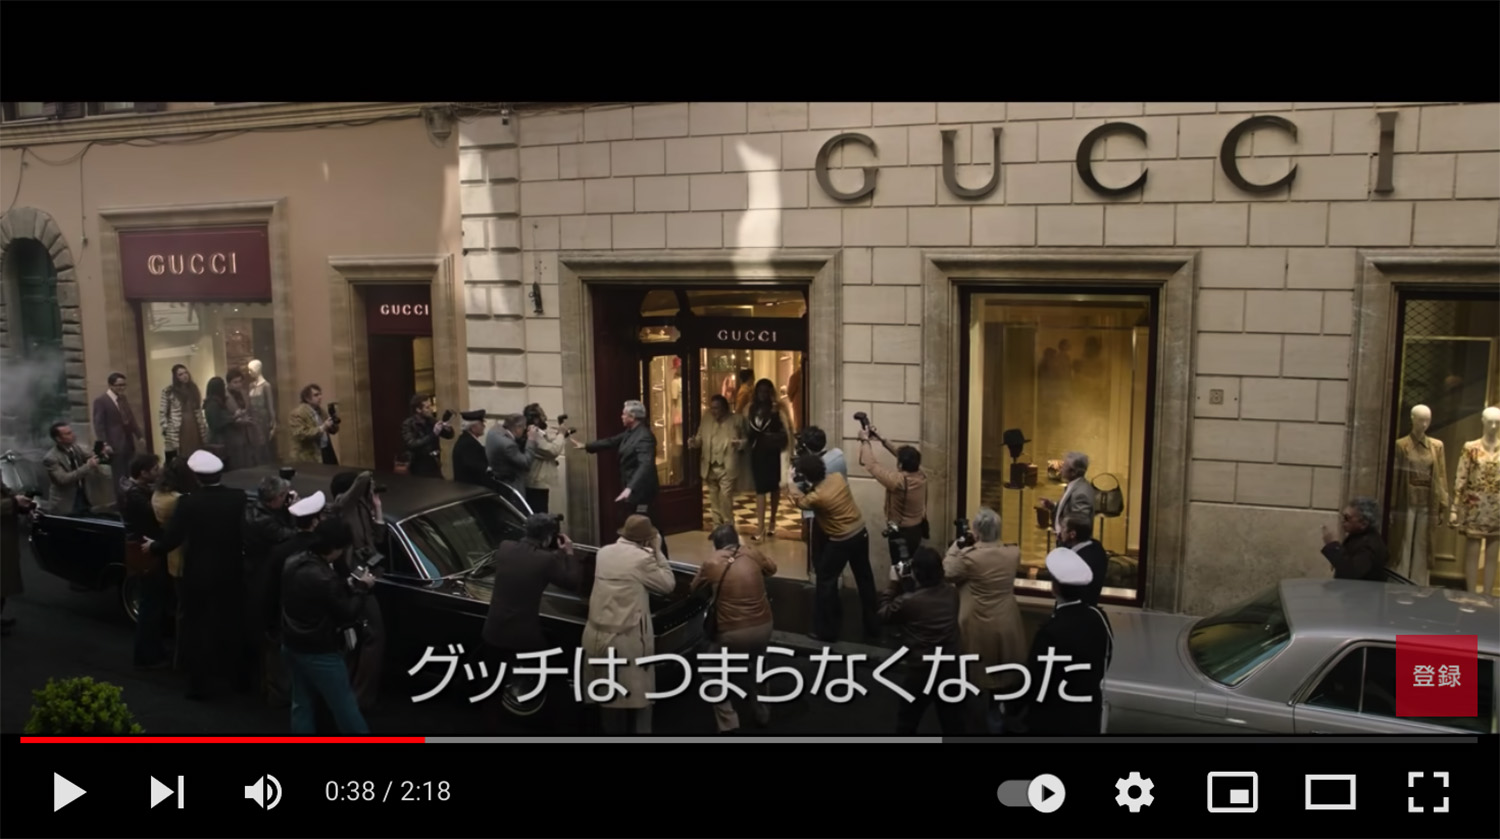 HOUSE OF GUCCI MOVIE